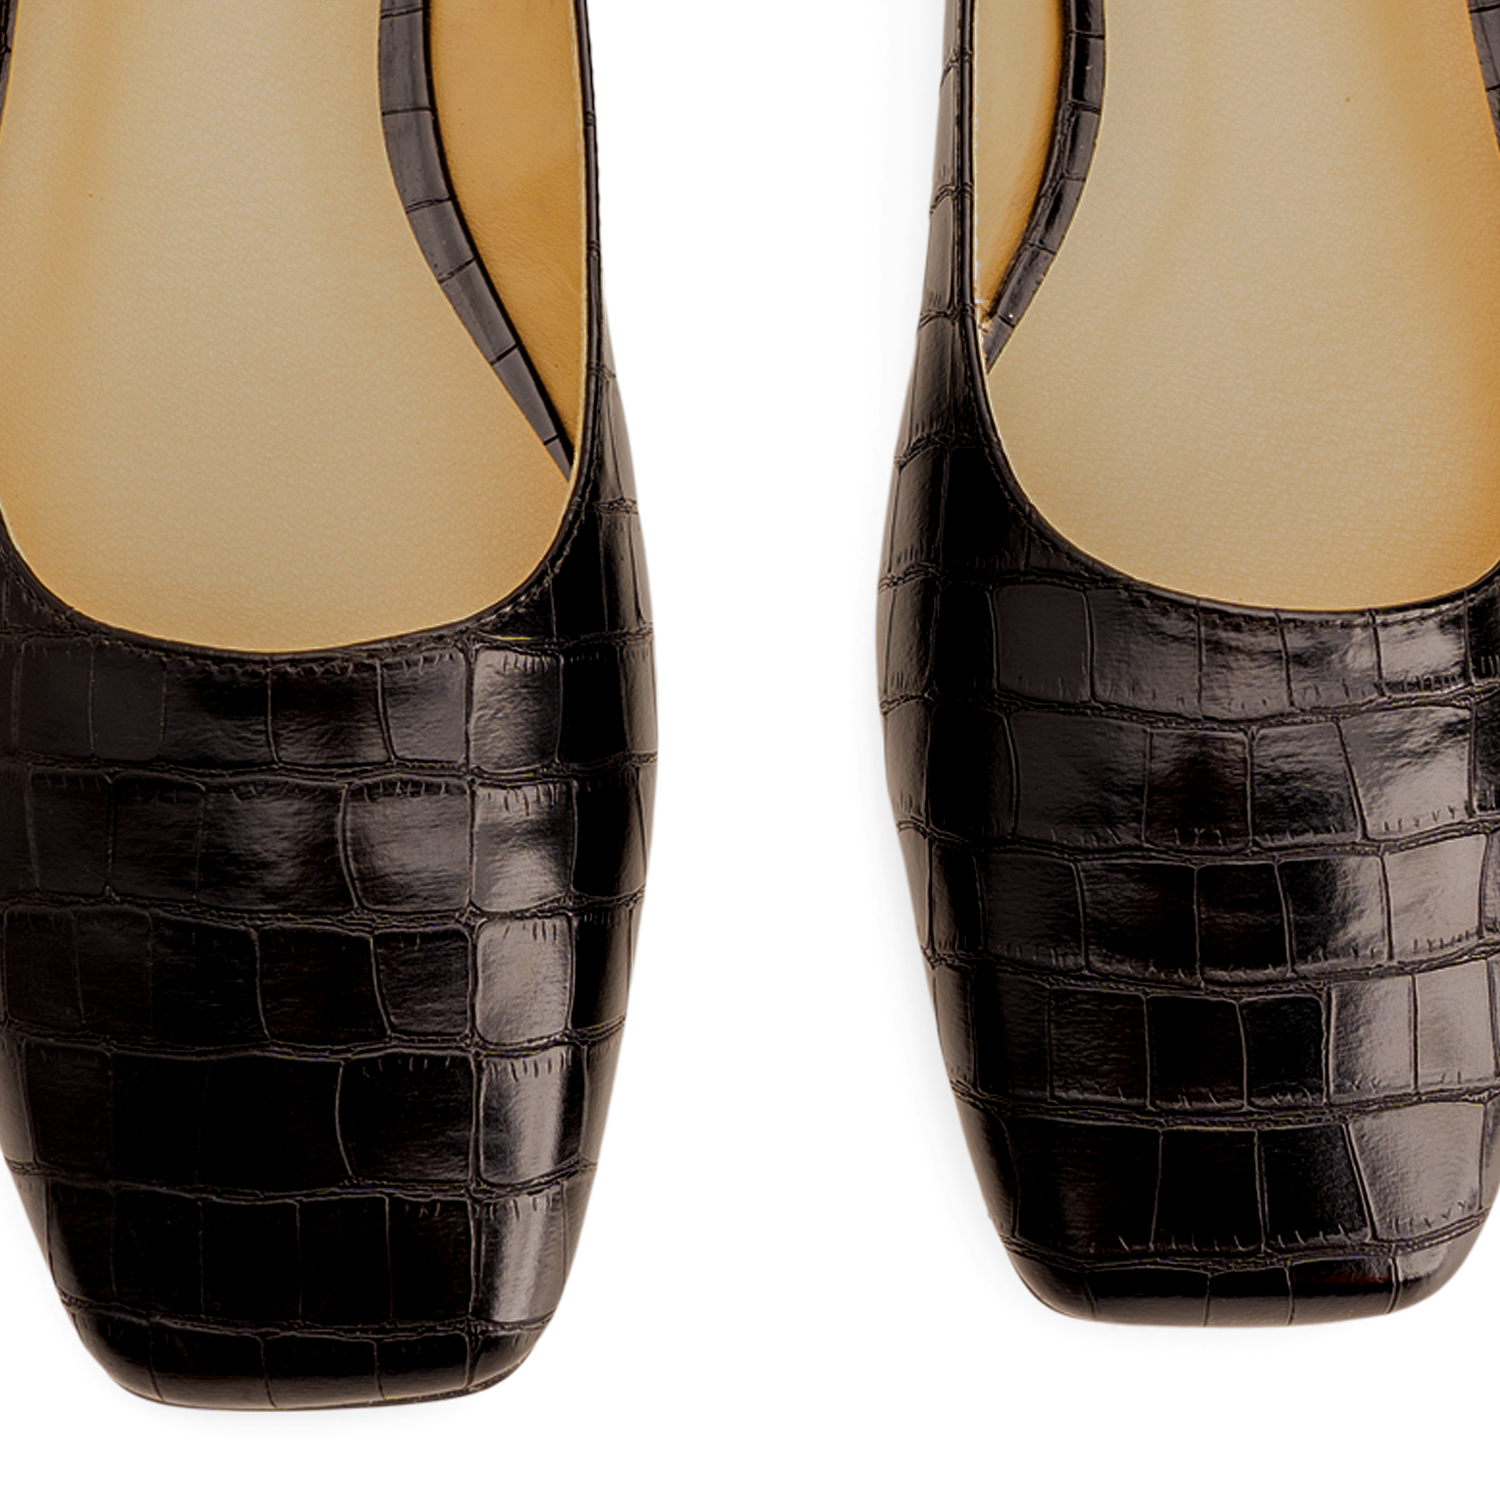 Ballerina flats in black faux croc leather 